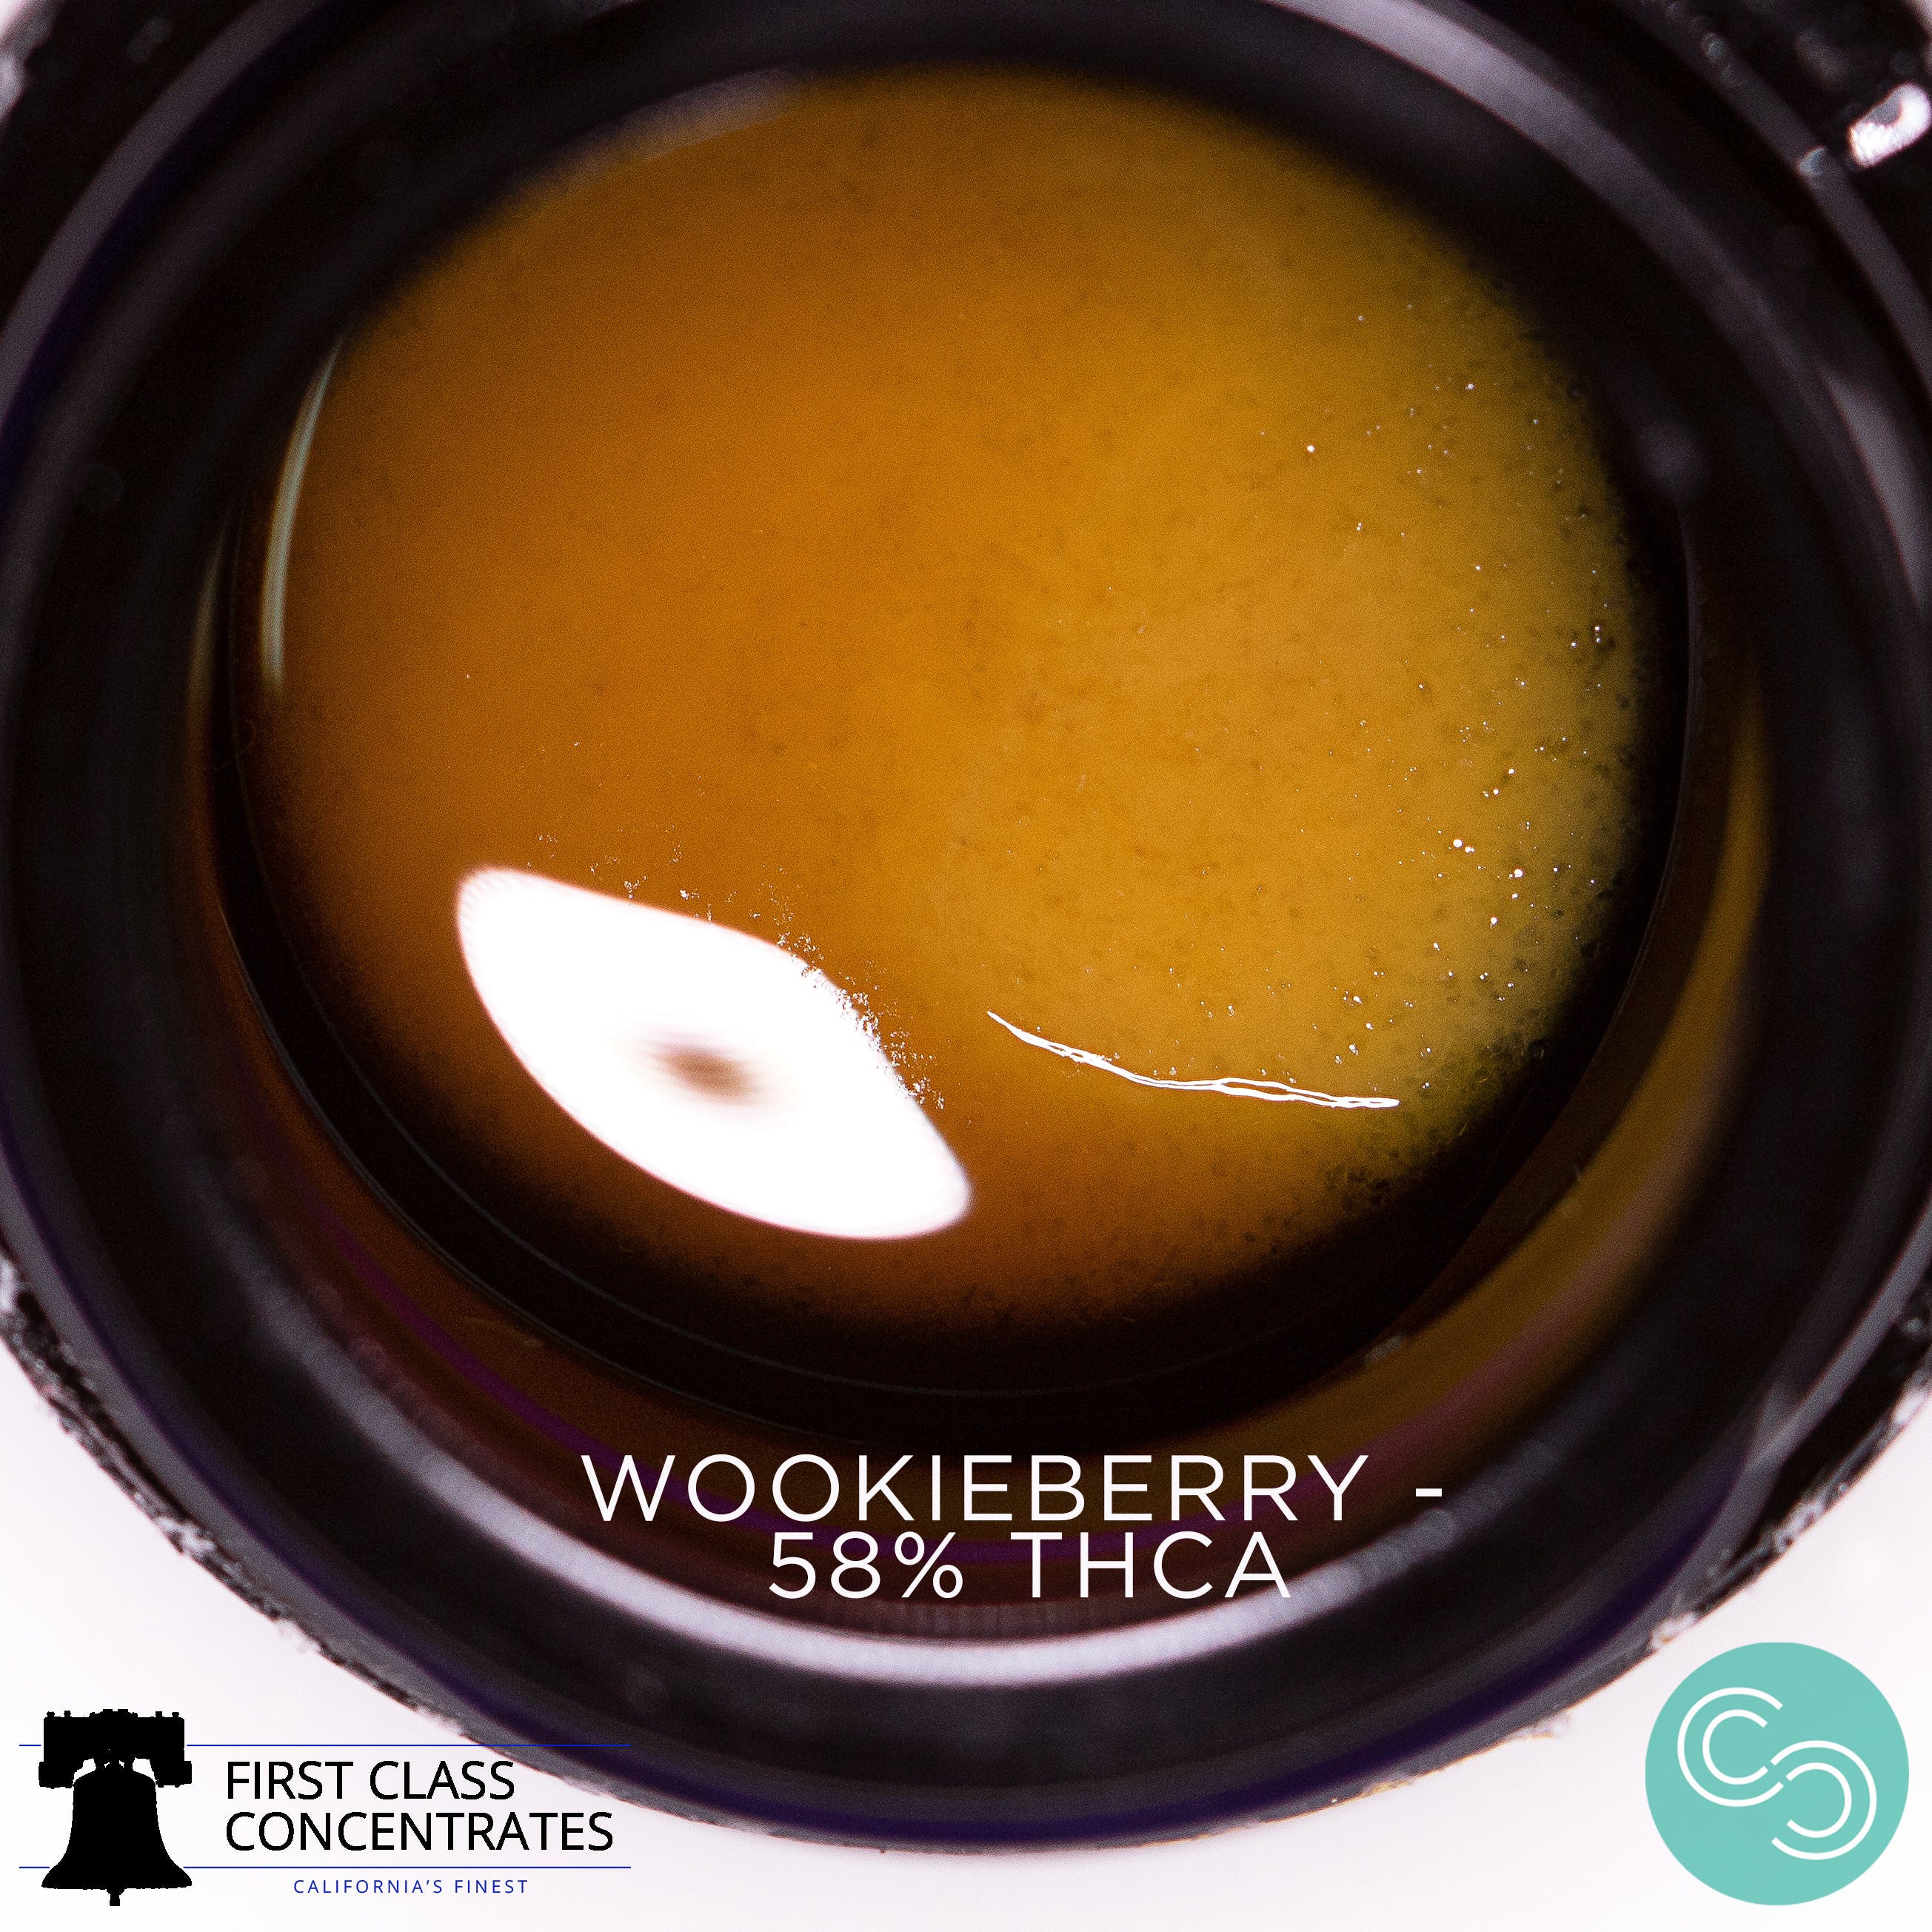 First Class Concentrates - Wookieberry - 58% THCA